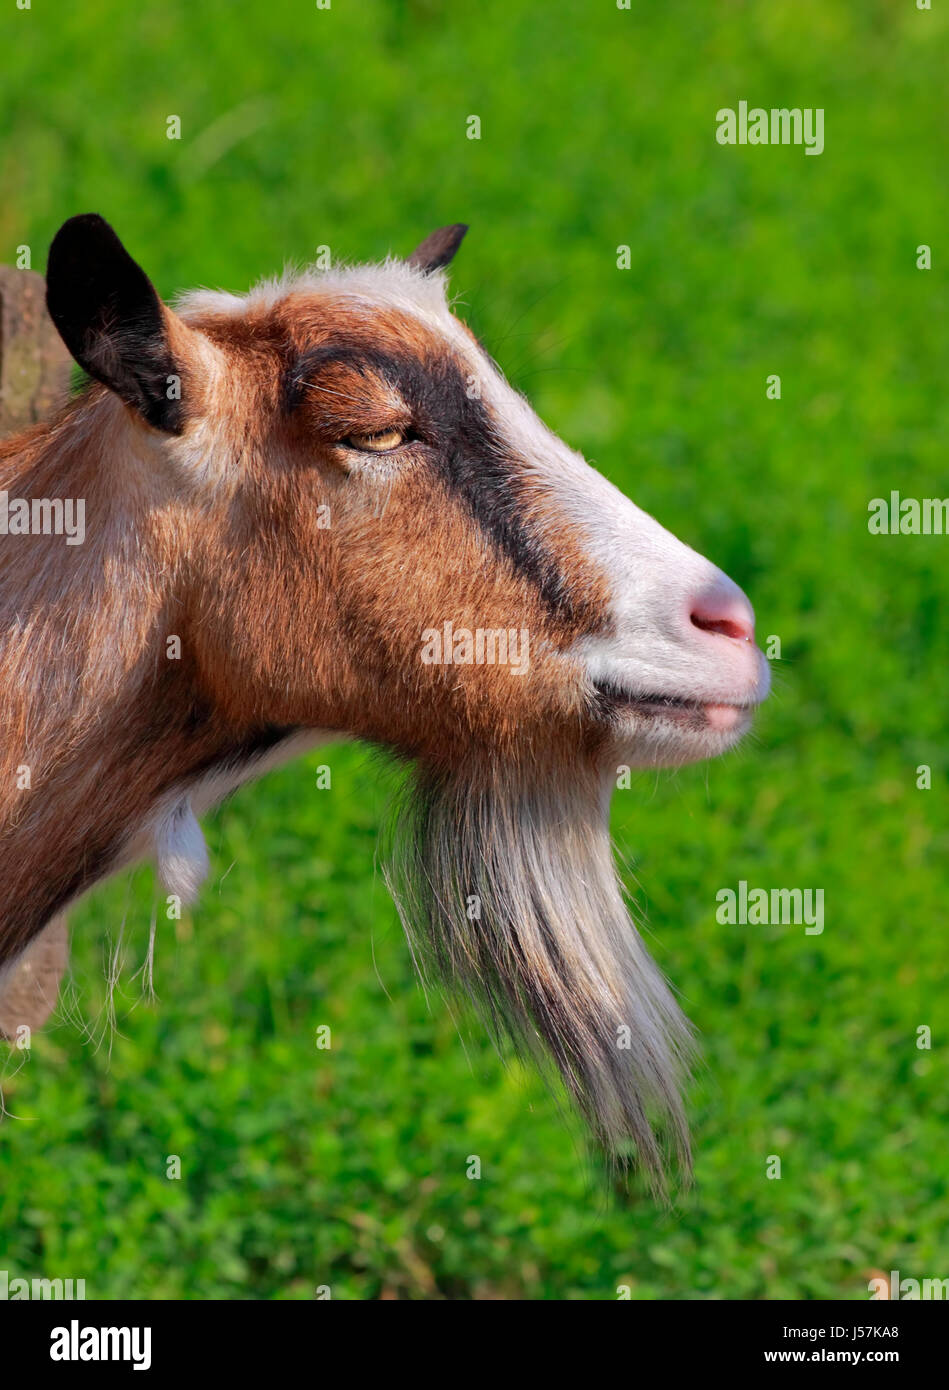 Billy goat portrait with unfocused green background Stock Photo